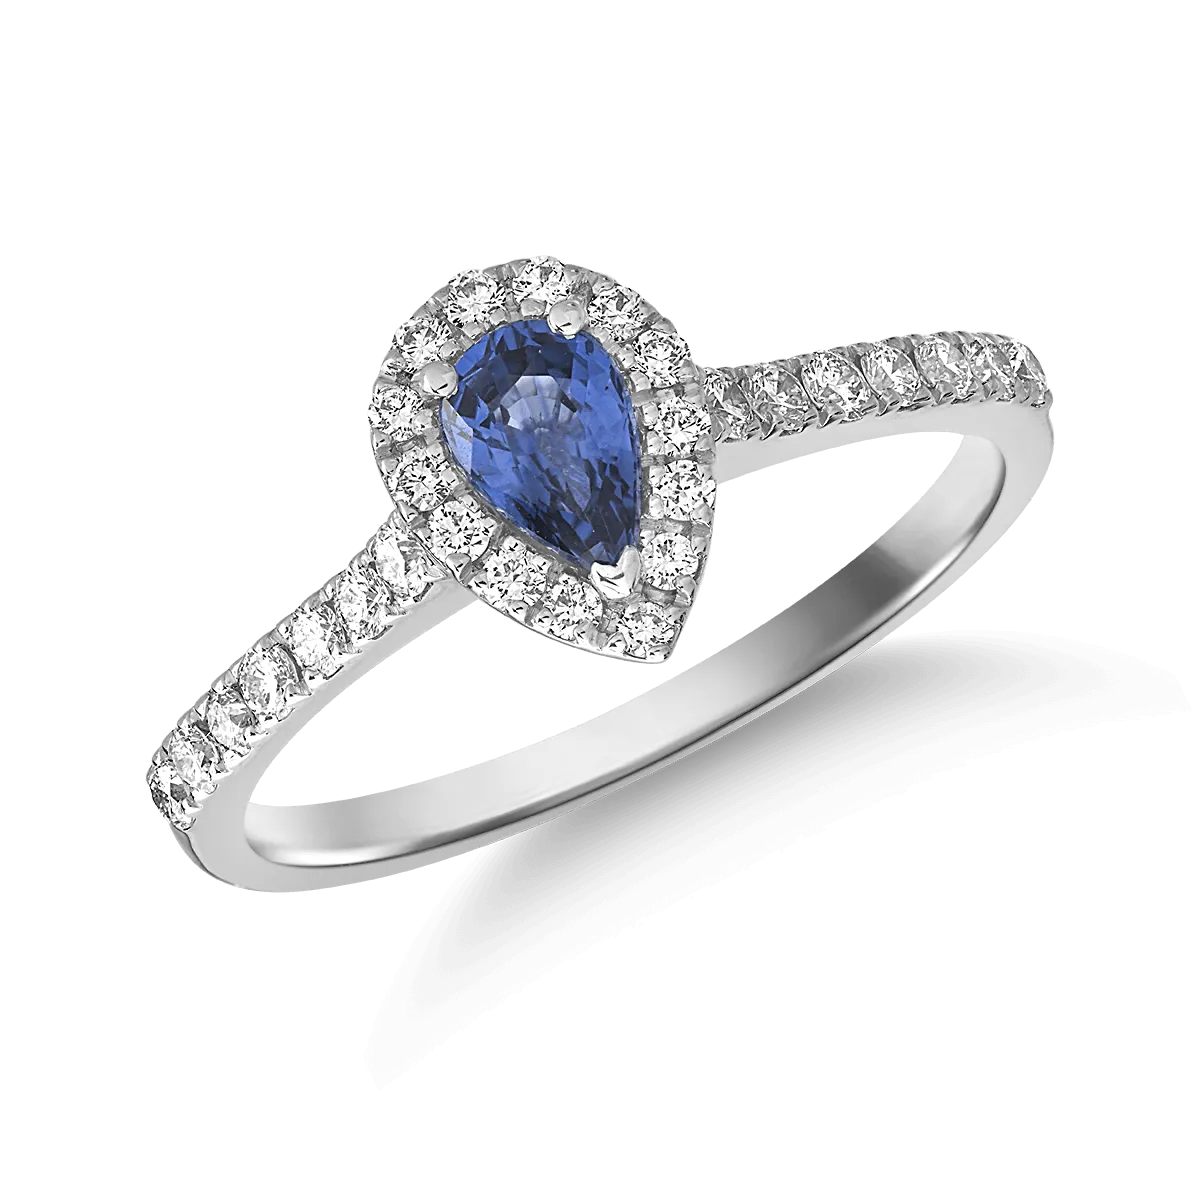 18K white gold ring with 0.53ct sapphire and 0.38ct diamonds